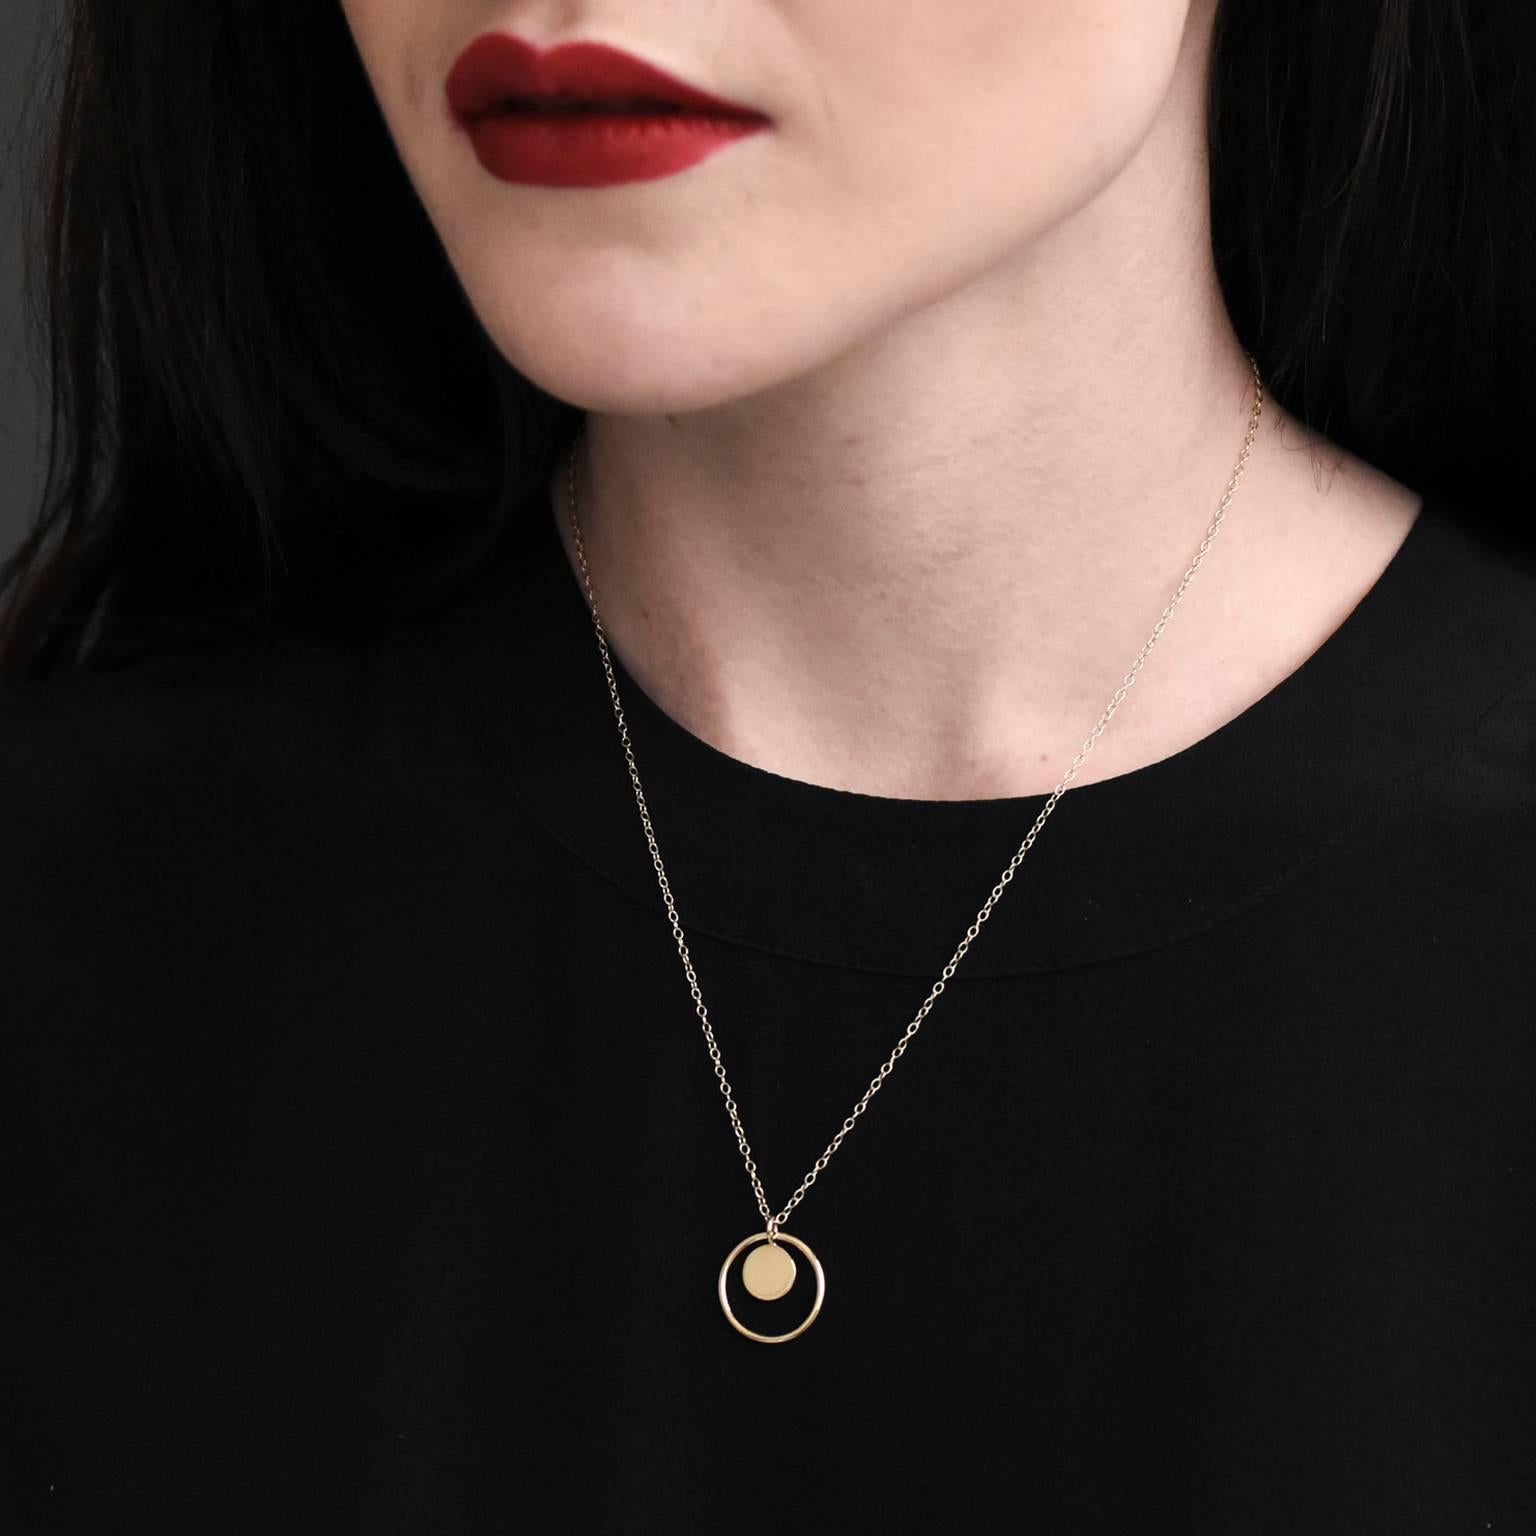 A pendant of two parts, the golden circular outline spins freely in the bail of the gold disc, perfect for those girls who like to fiddle with their jewellery! The pendant overall isn't too large, and can be easily worn with other gold necklaces for